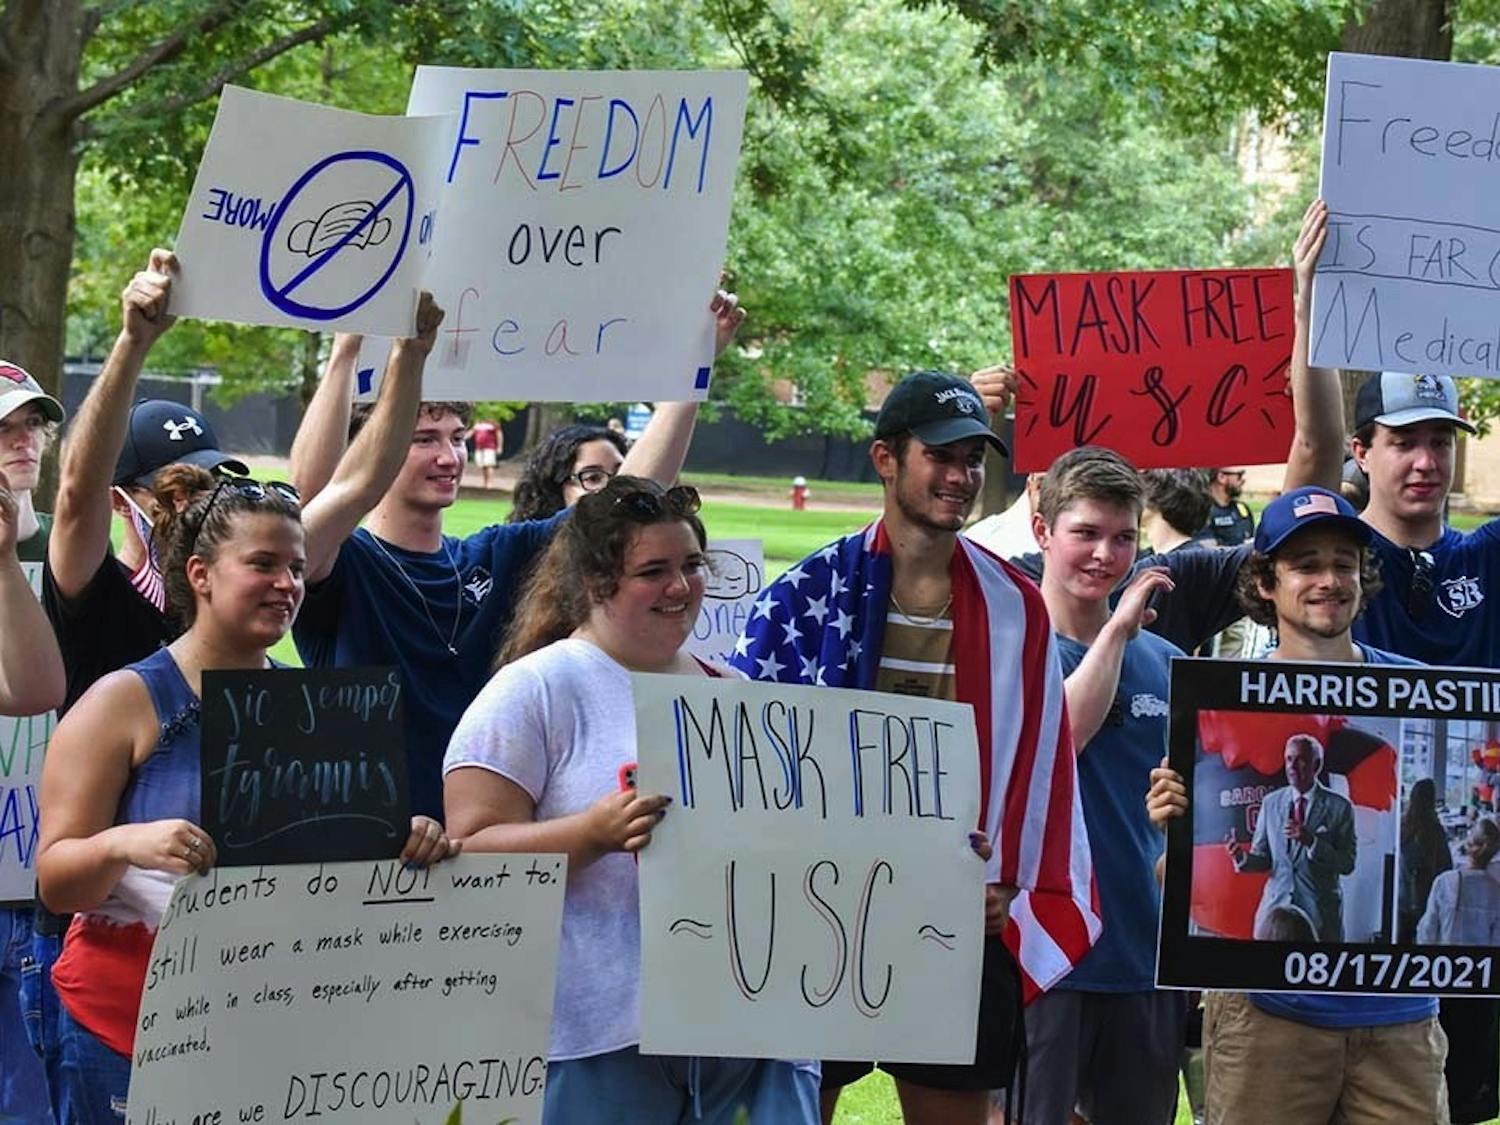 Members of the USC chapter of Turning Point USA pose with their signs on the Horseshoe after their protest. Turning Point USA’s protest was in response to the university's mask mandate and included Student Government senators John Hladun and Matt Harris.